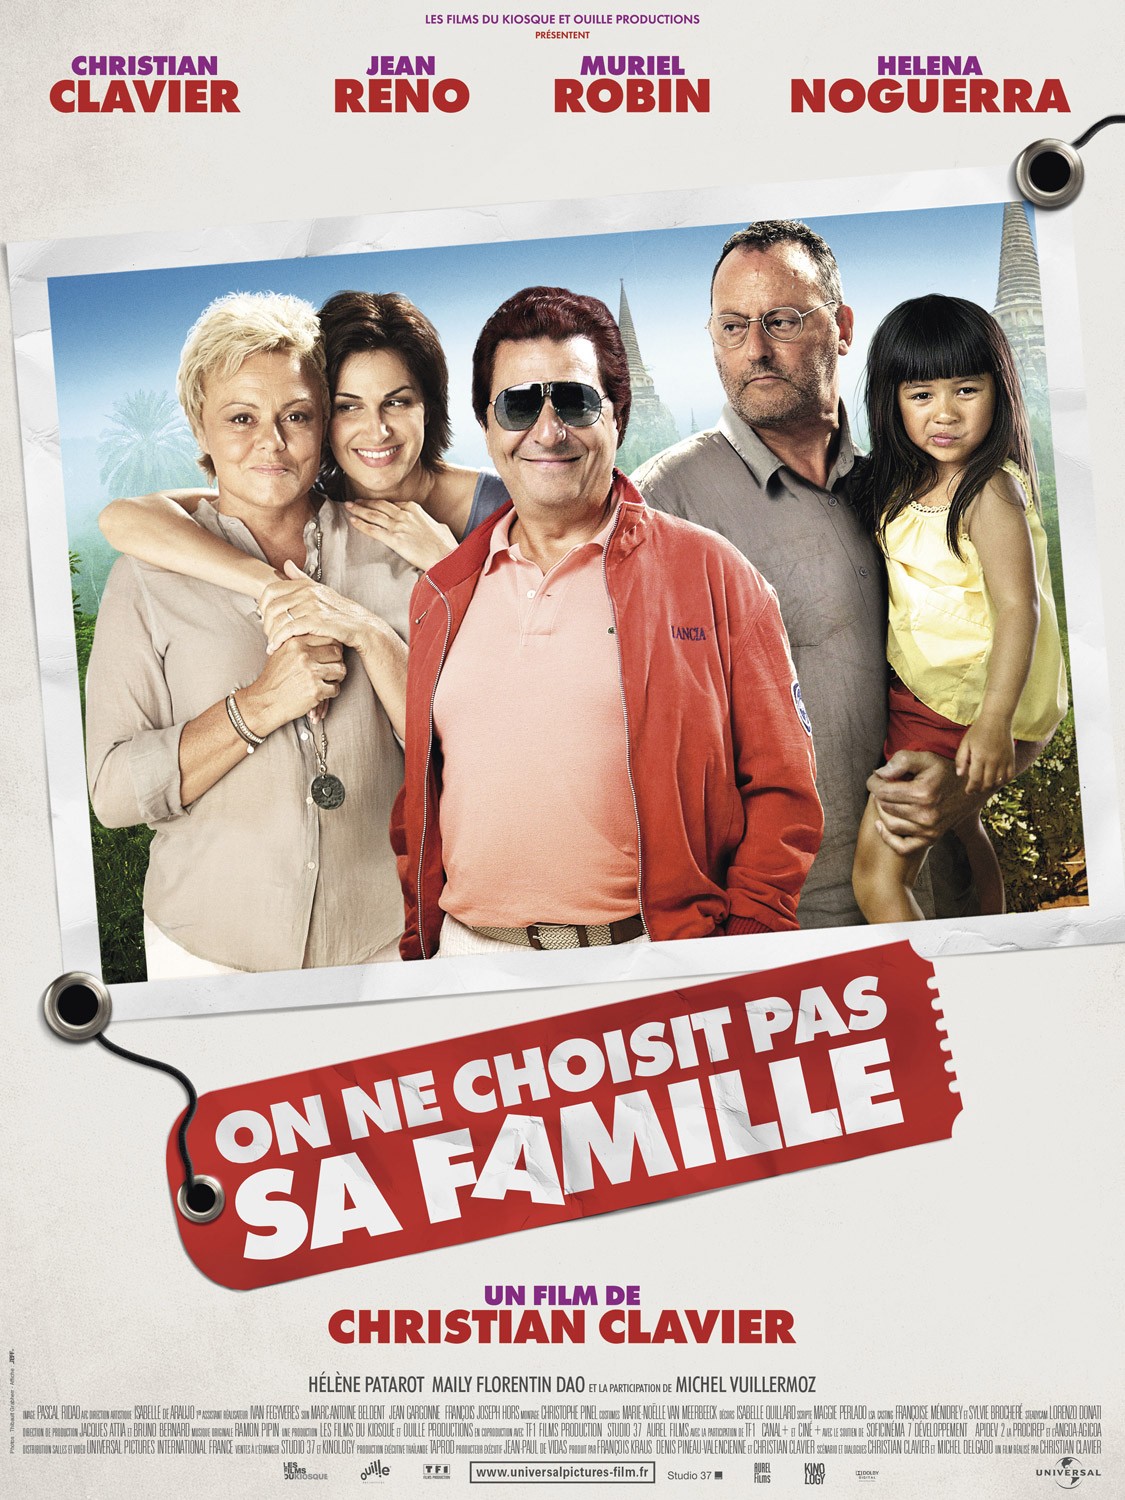 Extra Large Movie Poster Image for On ne choisit pas sa famille (#1 of 2)